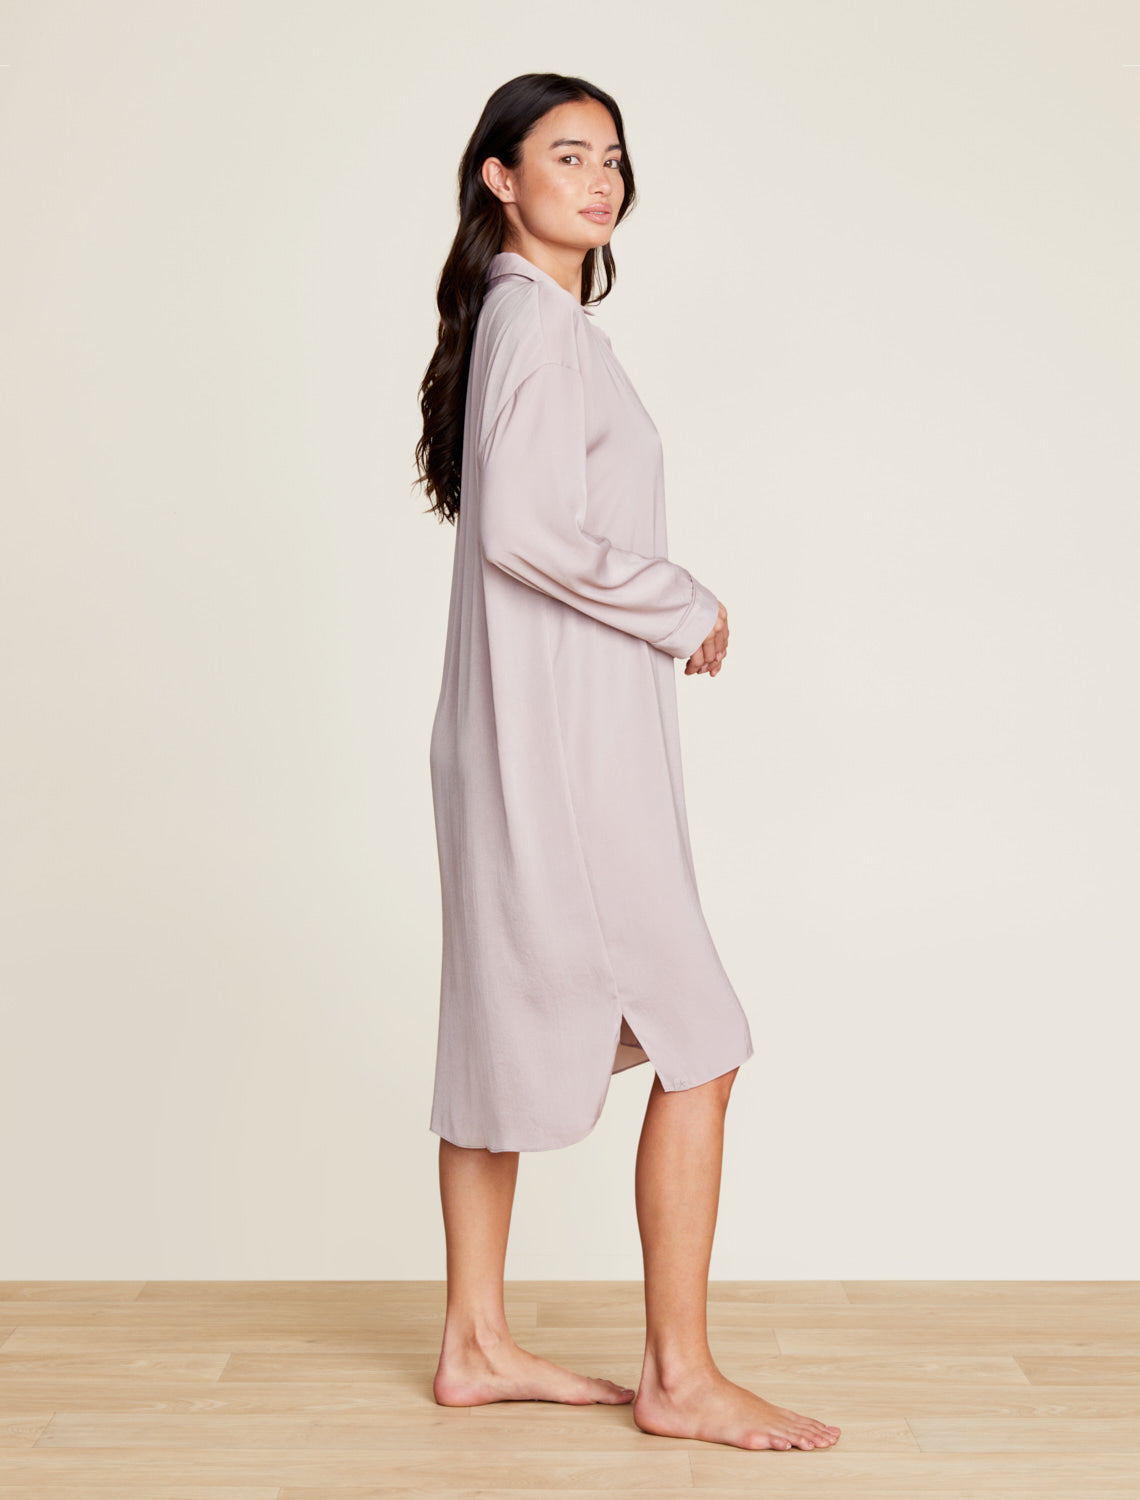 Washed Satin Piped Nightshirt with Love Embroidery